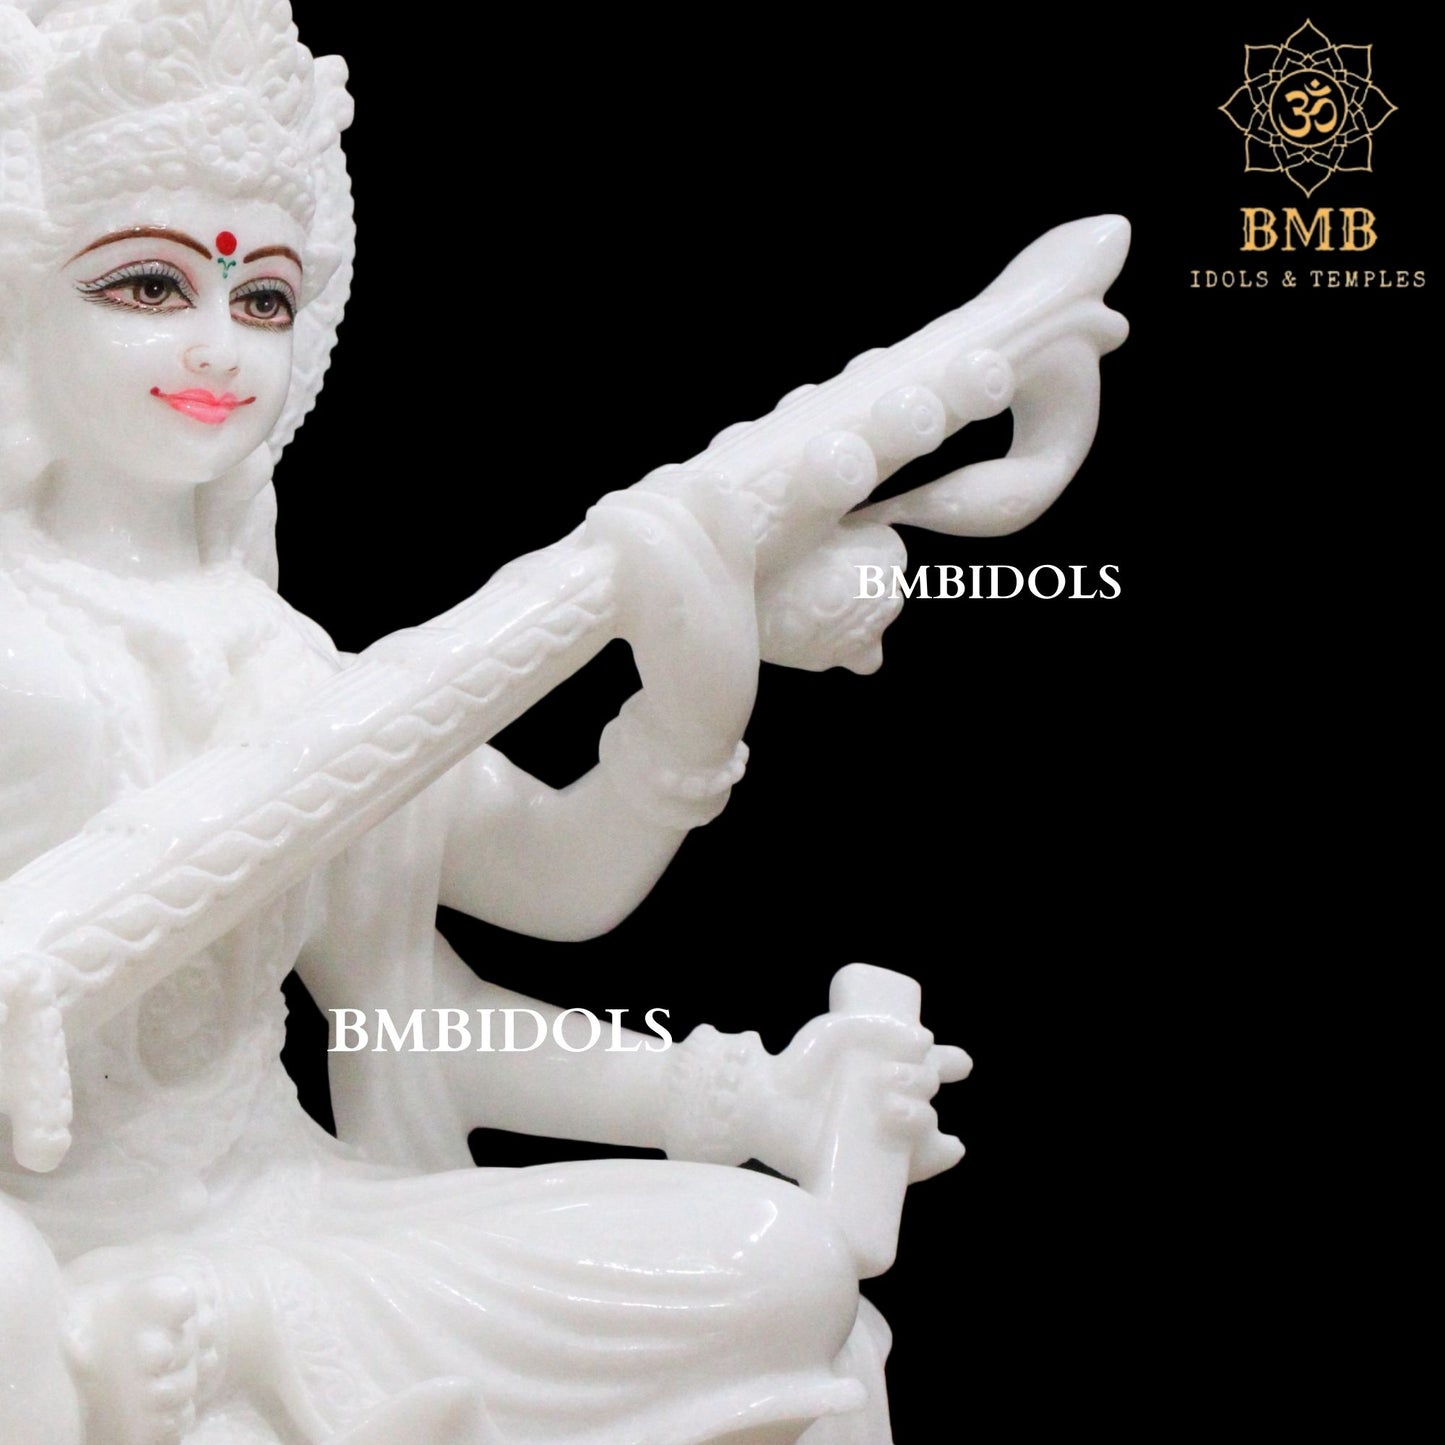 White Makrana Marble Saraswati Statue in 18inches for Home and Temple